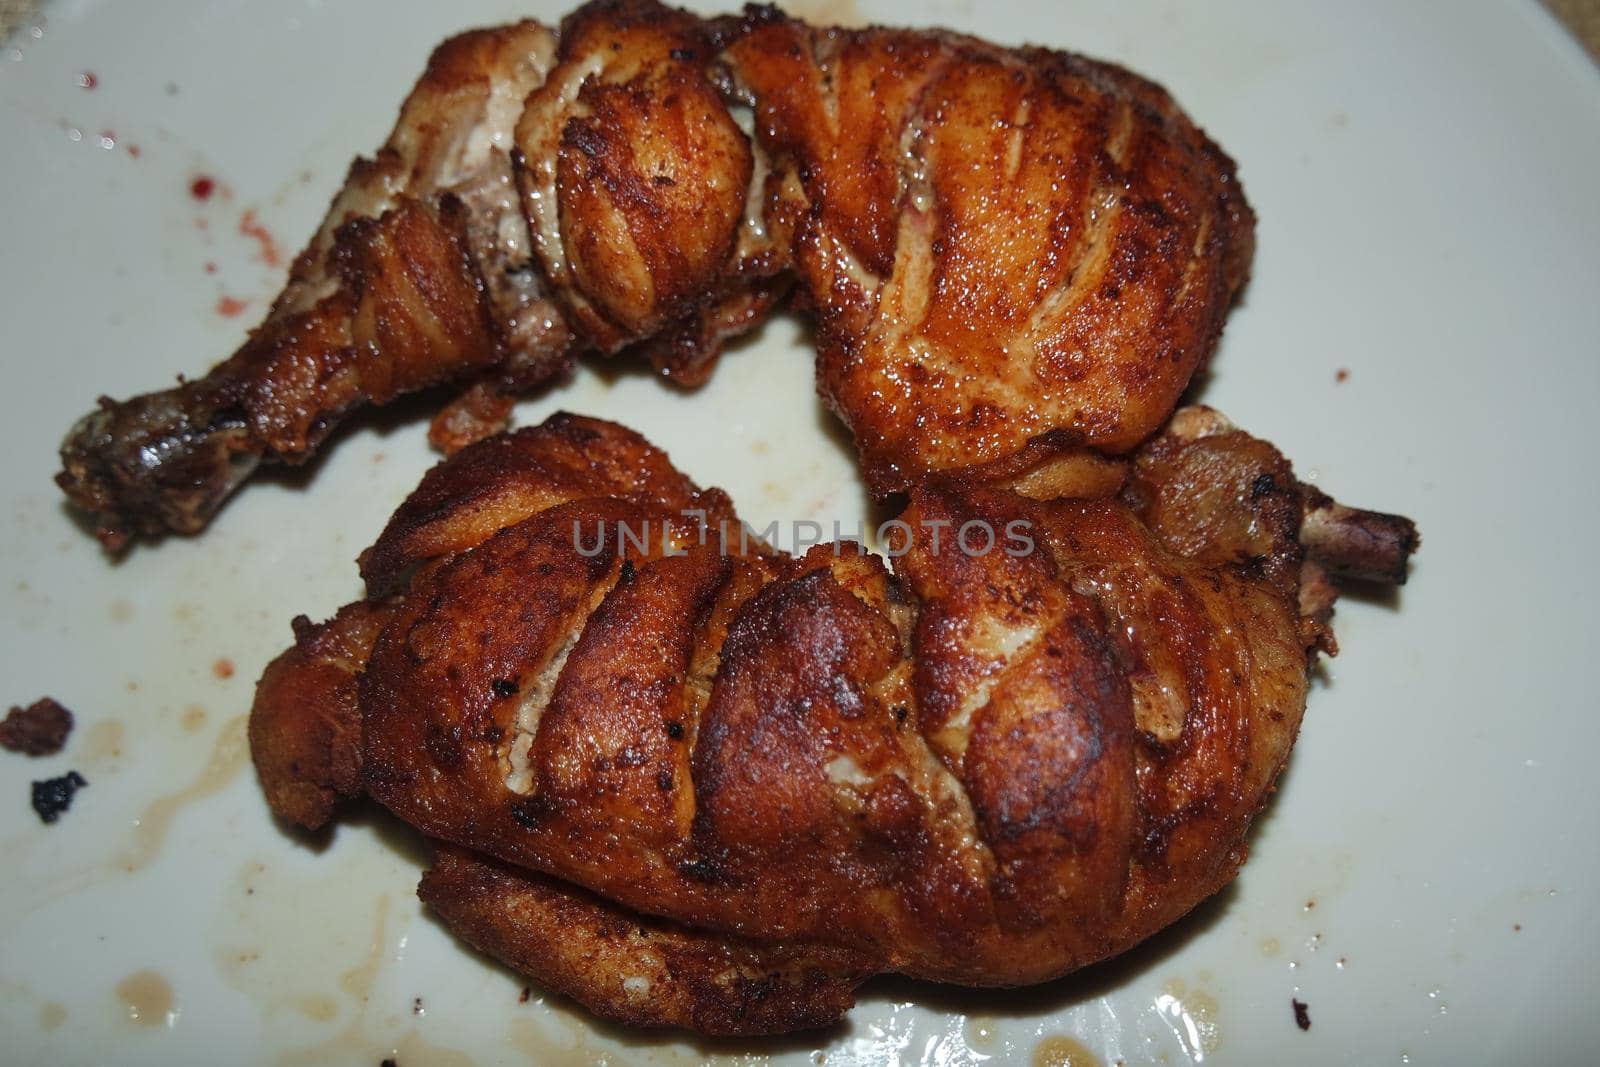 Fried, grilled baked chicken pieces with marinated spices on it. Tasty delicious fried chicken barbecue